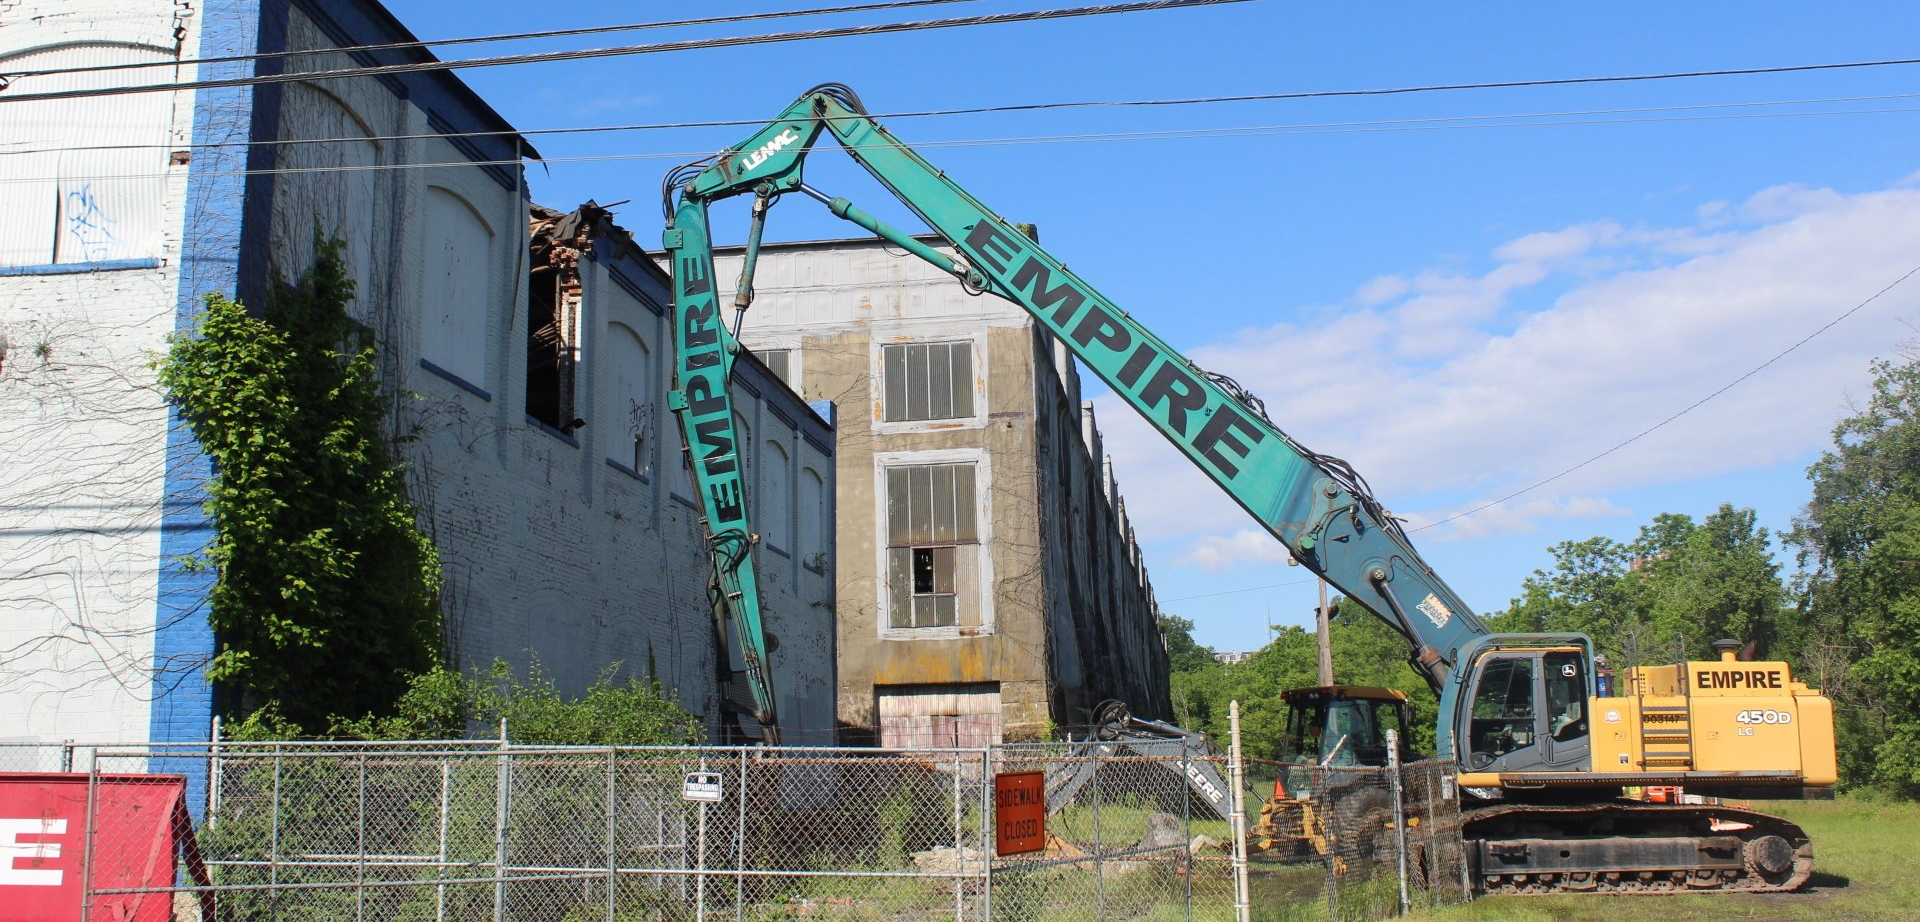 A large crane with the word empire on it is being used to demolish a building.